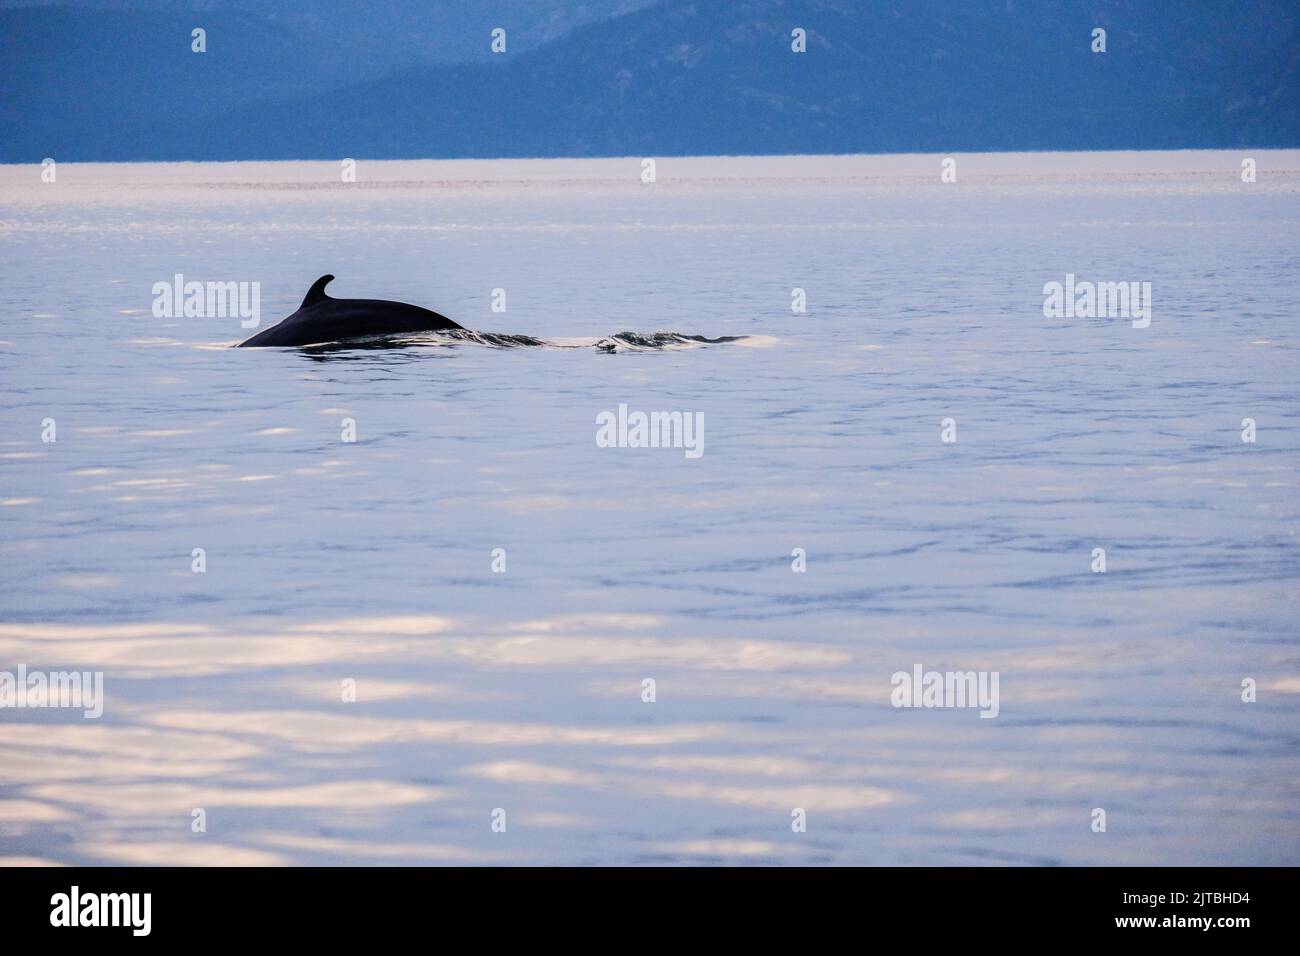 Minke whale St. Lawrence river near the Saguenay Fjord, Quebec, Canada. Stock Photo